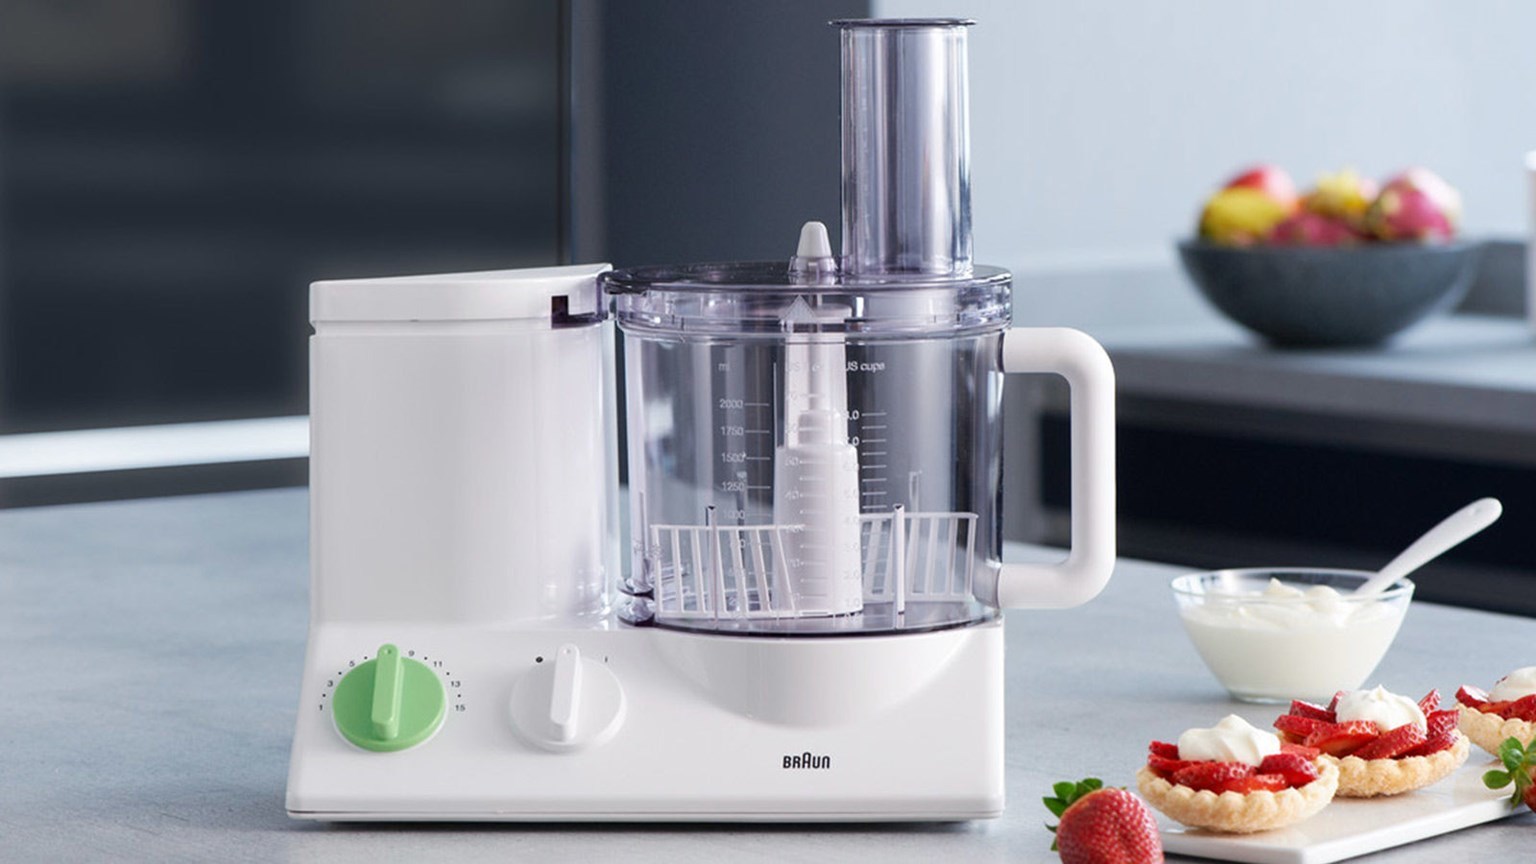 Precision and Performance: The Braun FP3020 12-Cup Food Processor in Action